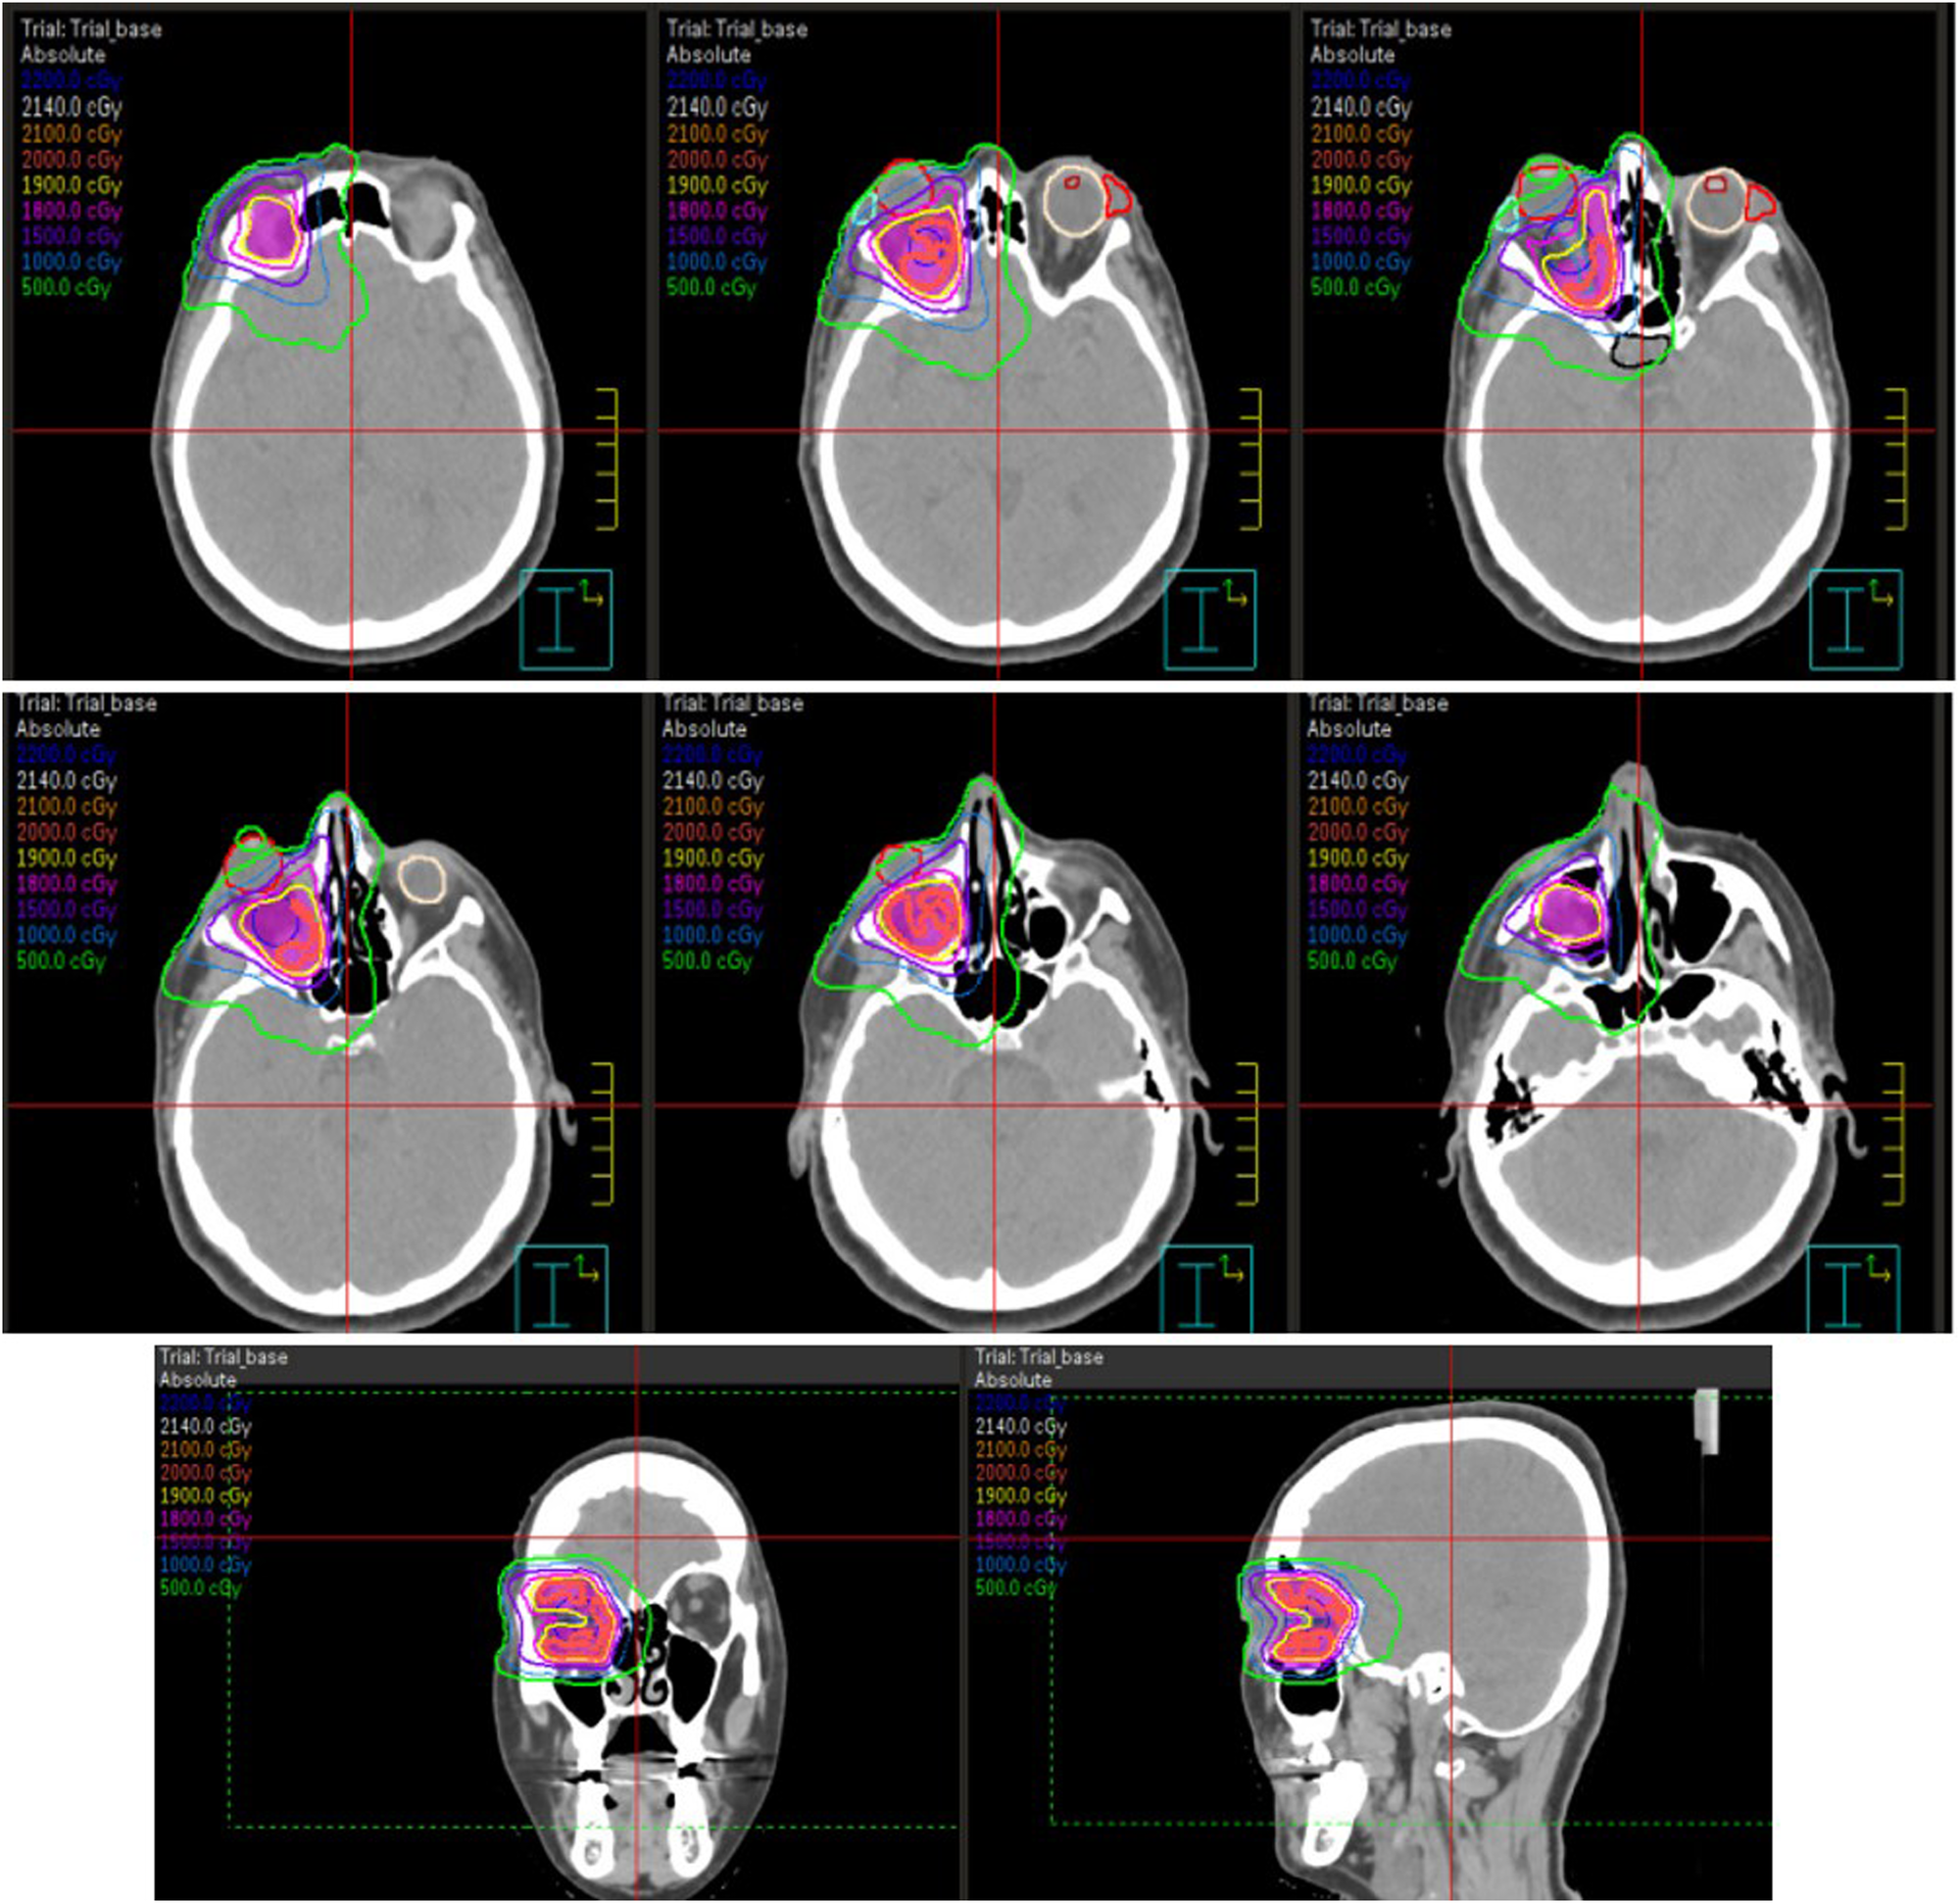 Late orbital radiotherapy combined with intravenous methylprednisolone in the management of long-lasting active graves’ orbitopathy: a case report and literature review